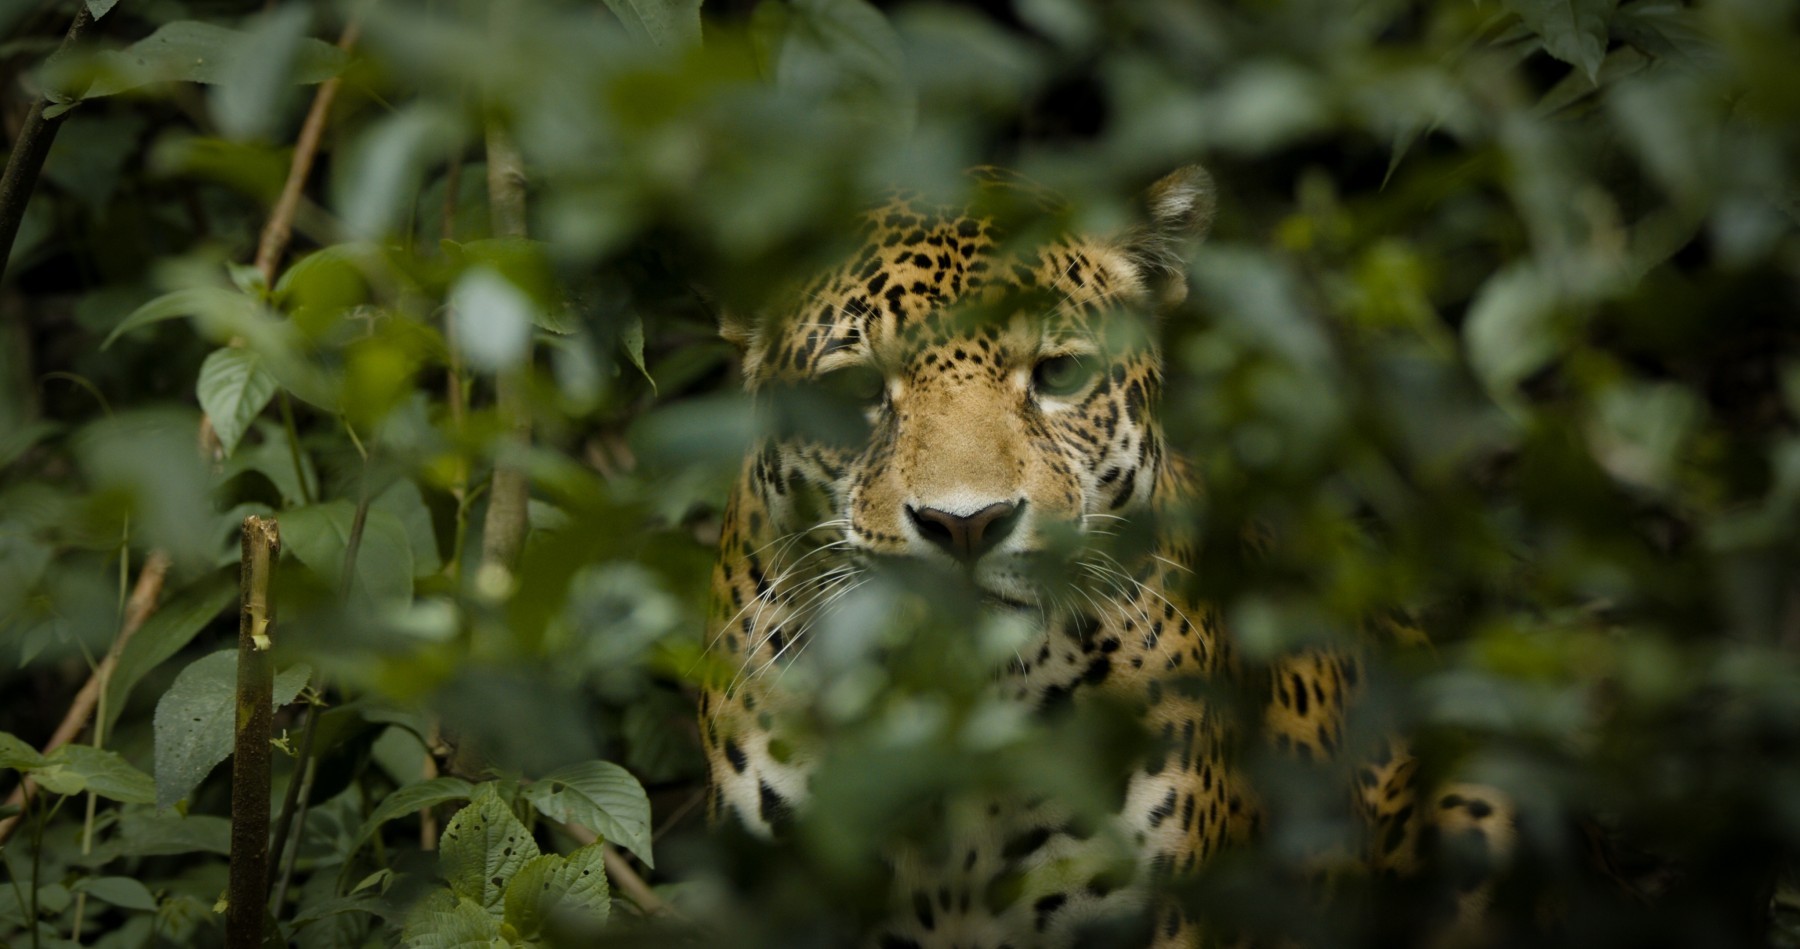 Jaguar Spirit is a World Animal Protection/National Geographic-funded film